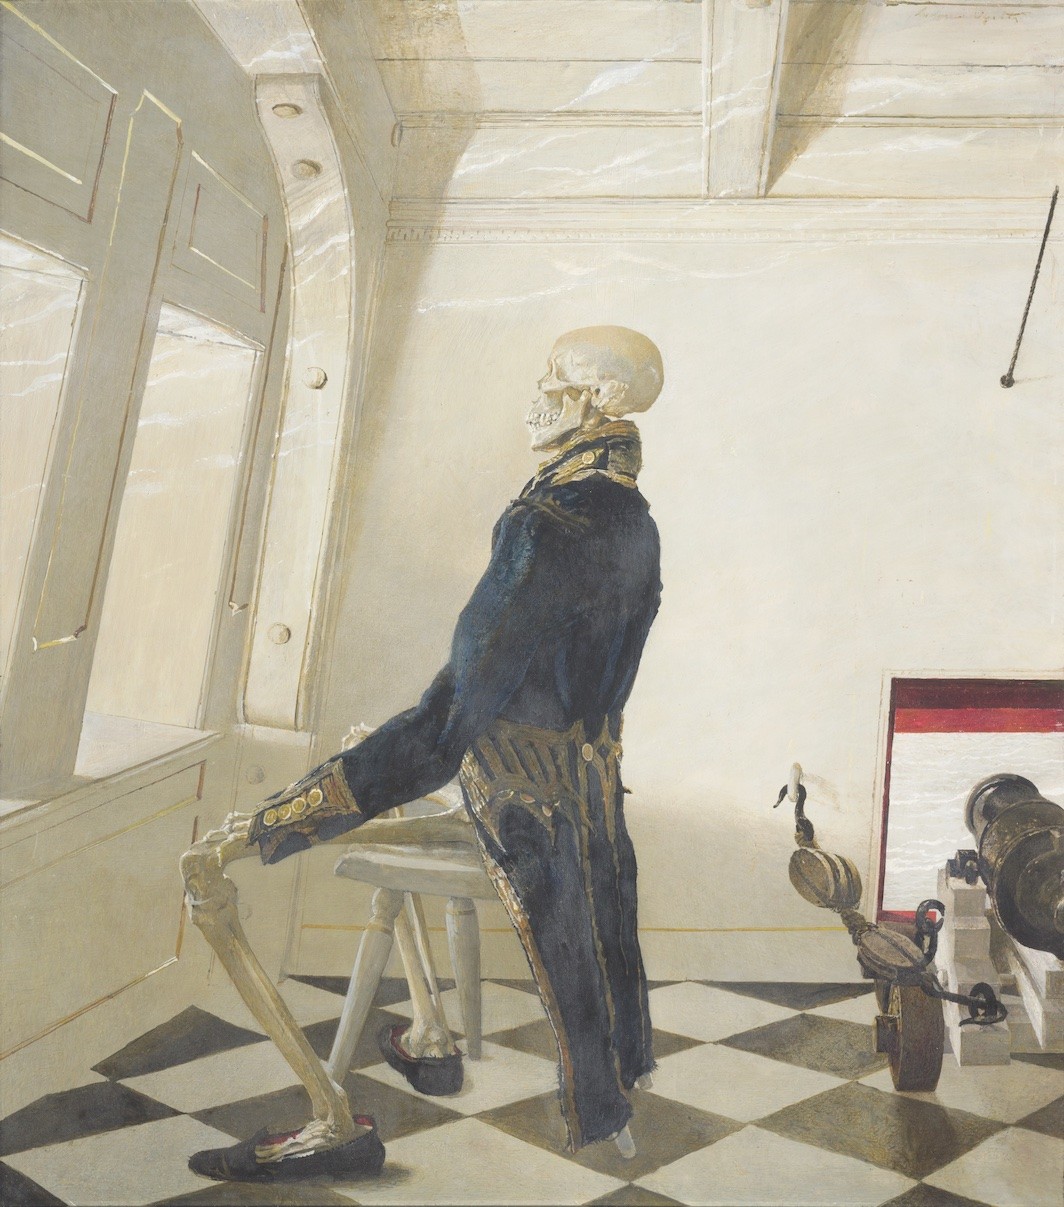 Andrew Wyeth, Dr. Syn, 1981, tempera on panel, 21 1/2 x 19". © Andrew Wyeth/Artists Rights Society (ARS); Collection of the Wyeth Foundation for American Art